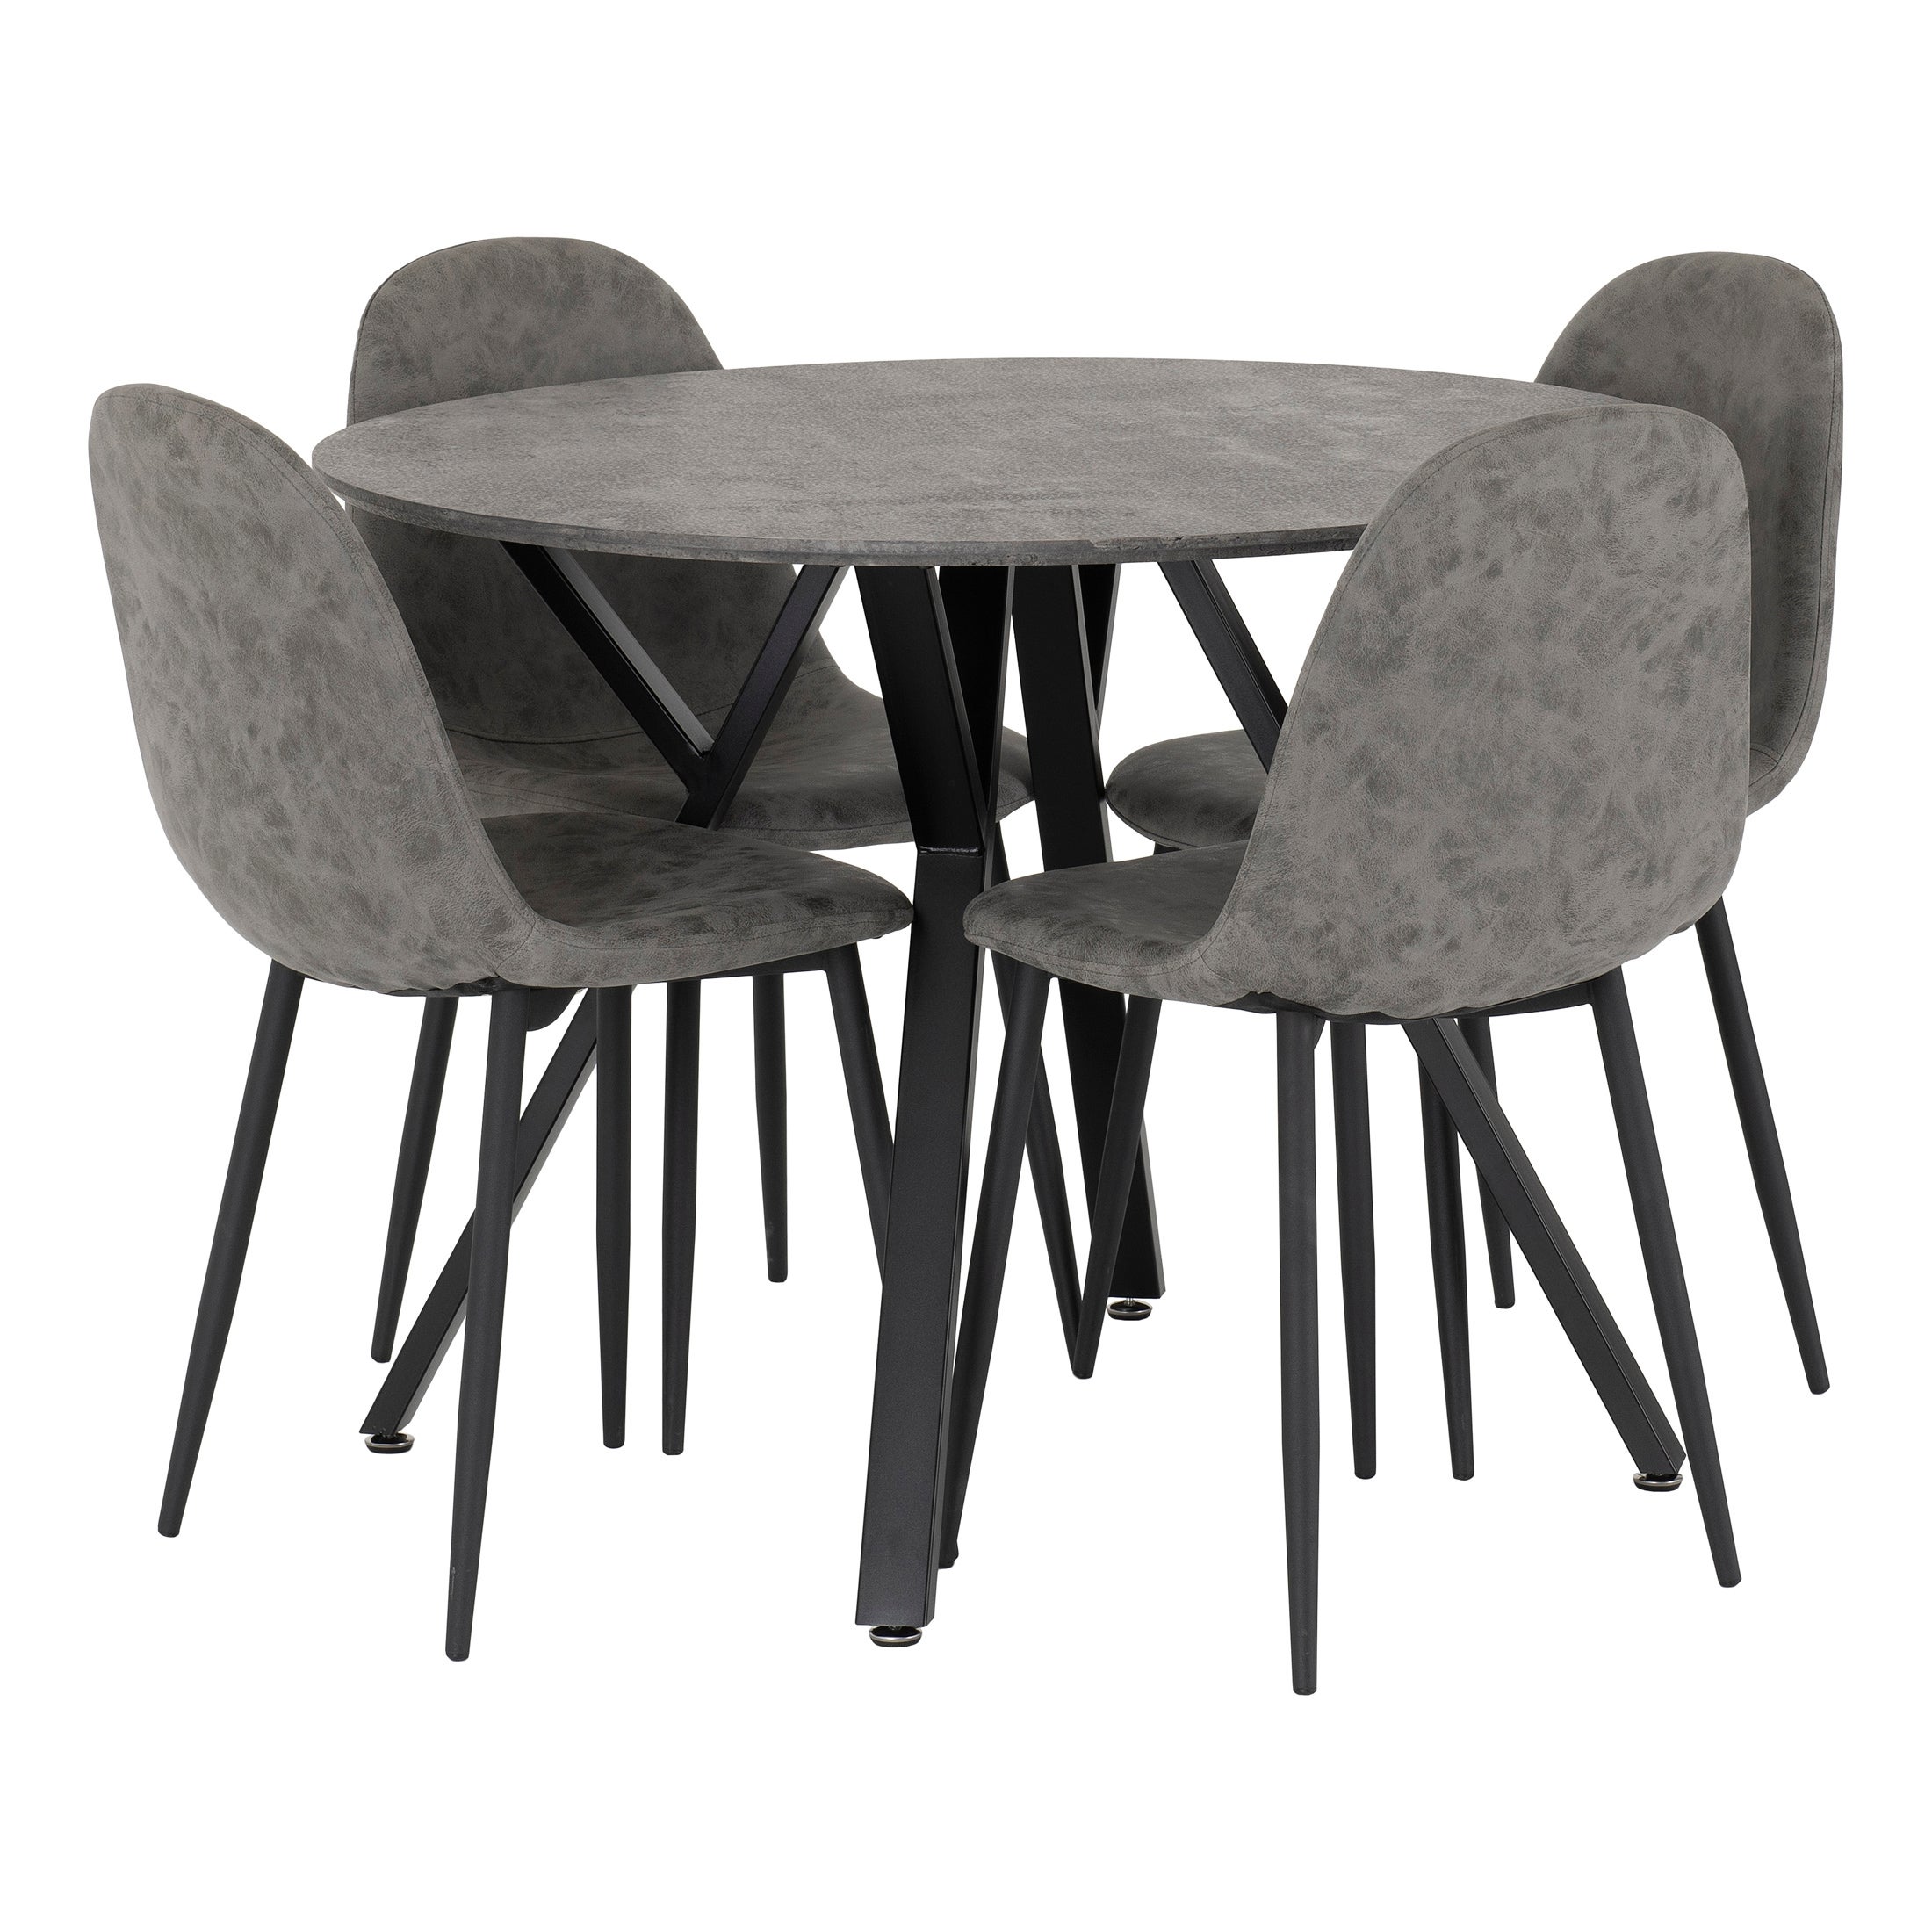 Athens Round Dining Table with 4 Chairs, Grey Concrete Effect Grey